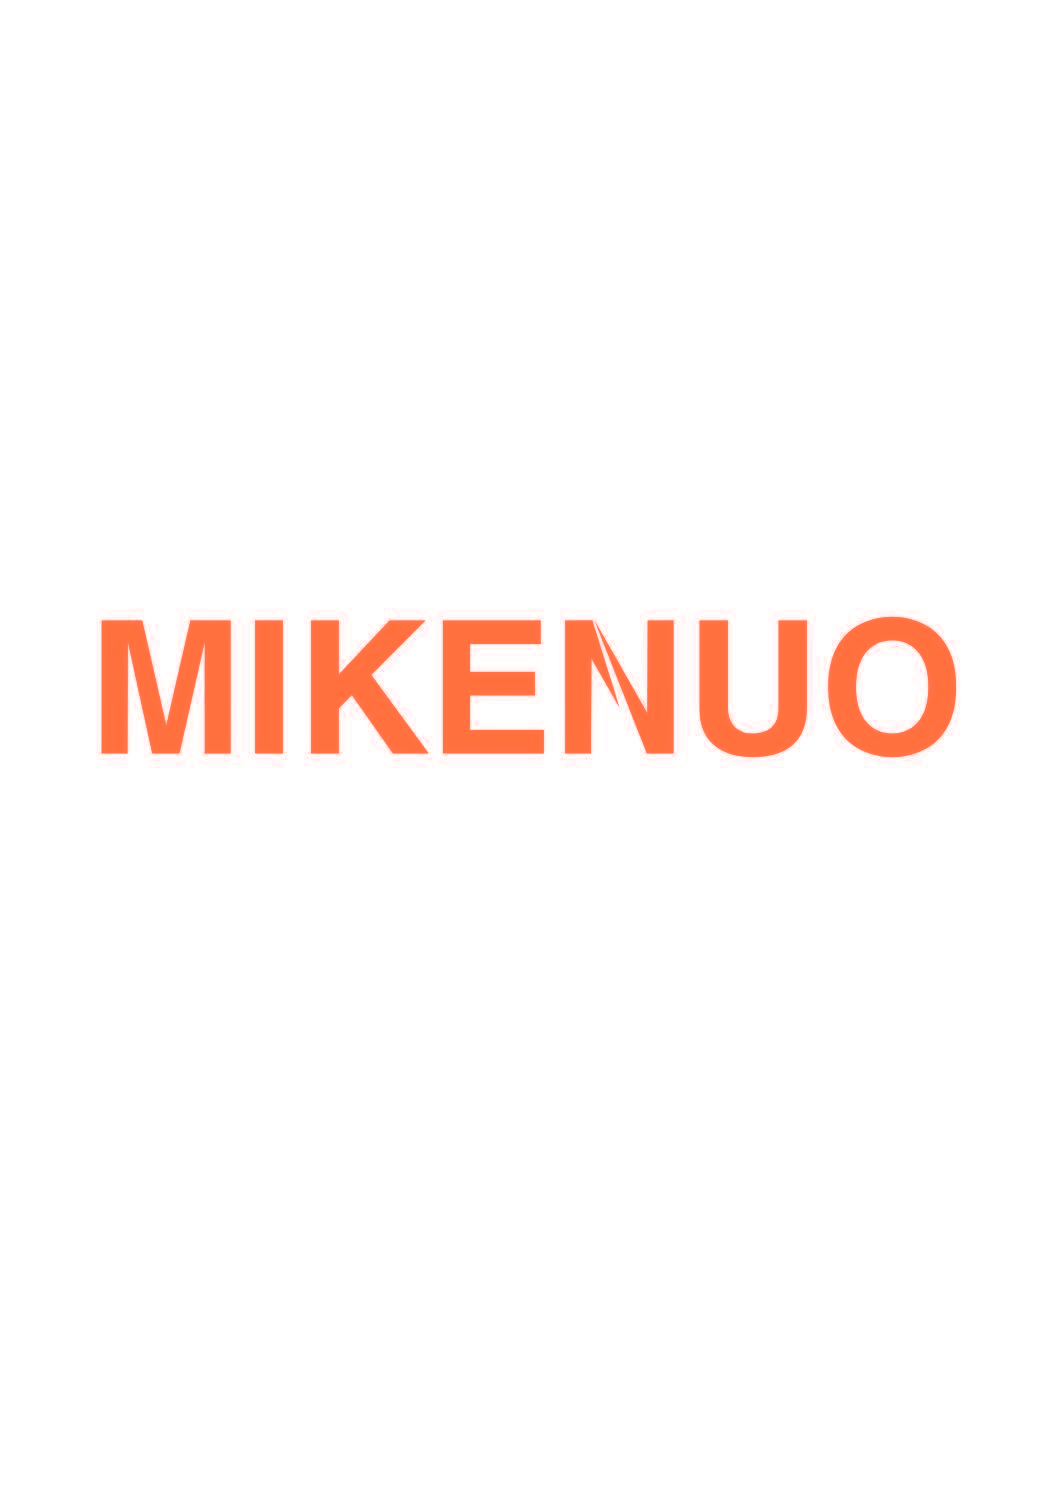 MIKENUO